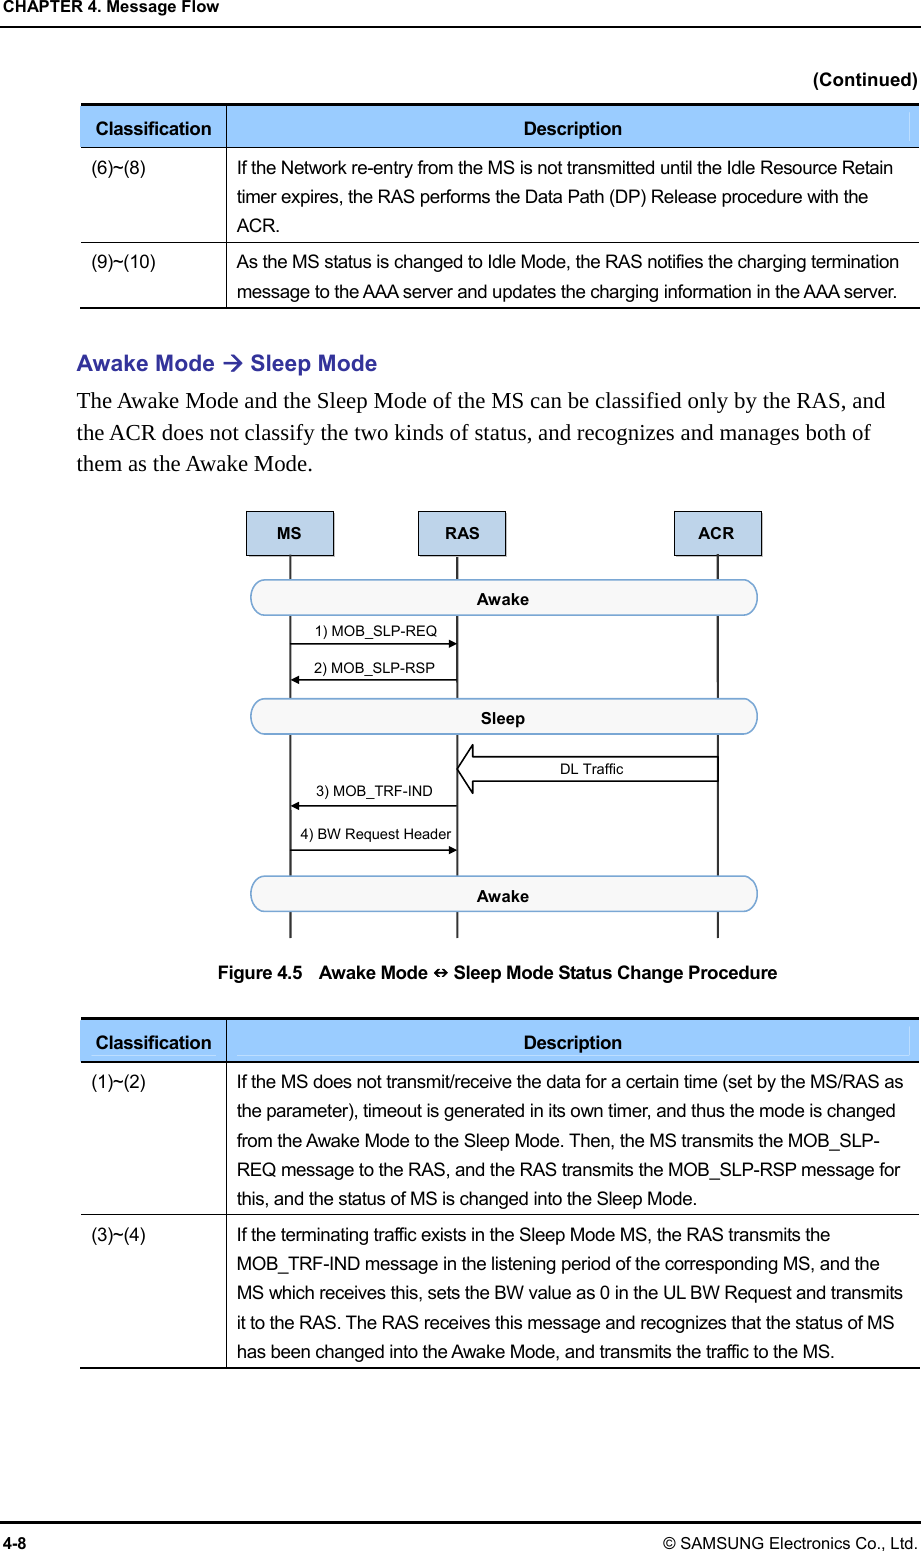 CHAPTER 4. Message Flow 4-8 © SAMSUNG Electronics Co., Ltd. (Continued) Classification  Description (6)~(8)  If the Network re-entry from the MS is not transmitted until the Idle Resource Retain timer expires, the RAS performs the Data Path (DP) Release procedure with the ACR. (9)~(10)  As the MS status is changed to Idle Mode, the RAS notifies the charging termination message to the AAA server and updates the charging information in the AAA server.  Awake Mode Æ Sleep Mode The Awake Mode and the Sleep Mode of the MS can be classified only by the RAS, and the ACR does not classify the two kinds of status, and recognizes and manages both of them as the Awake Mode.  Figure 4.5  Awake Mode Q Sleep Mode Status Change Procedure  Classification  Description (1)~(2)  If the MS does not transmit/receive the data for a certain time (set by the MS/RAS as the parameter), timeout is generated in its own timer, and thus the mode is changed from the Awake Mode to the Sleep Mode. Then, the MS transmits the MOB_SLP-REQ message to the RAS, and the RAS transmits the MOB_SLP-RSP message for this, and the status of MS is changed into the Sleep Mode. (3)~(4)  If the terminating traffic exists in the Sleep Mode MS, the RAS transmits the MOB_TRF-IND message in the listening period of the corresponding MS, and the MS which receives this, sets the BW value as 0 in the UL BW Request and transmits it to the RAS. The RAS receives this message and recognizes that the status of MS has been changed into the Awake Mode, and transmits the traffic to the MS.  MS RAS ACR 2) MOB_SLP-RSP 1) MOB_SLP-REQ Awake Sleep 3) MOB_TRF-IND 4) BW Request HeaderAwake DL Traffic 